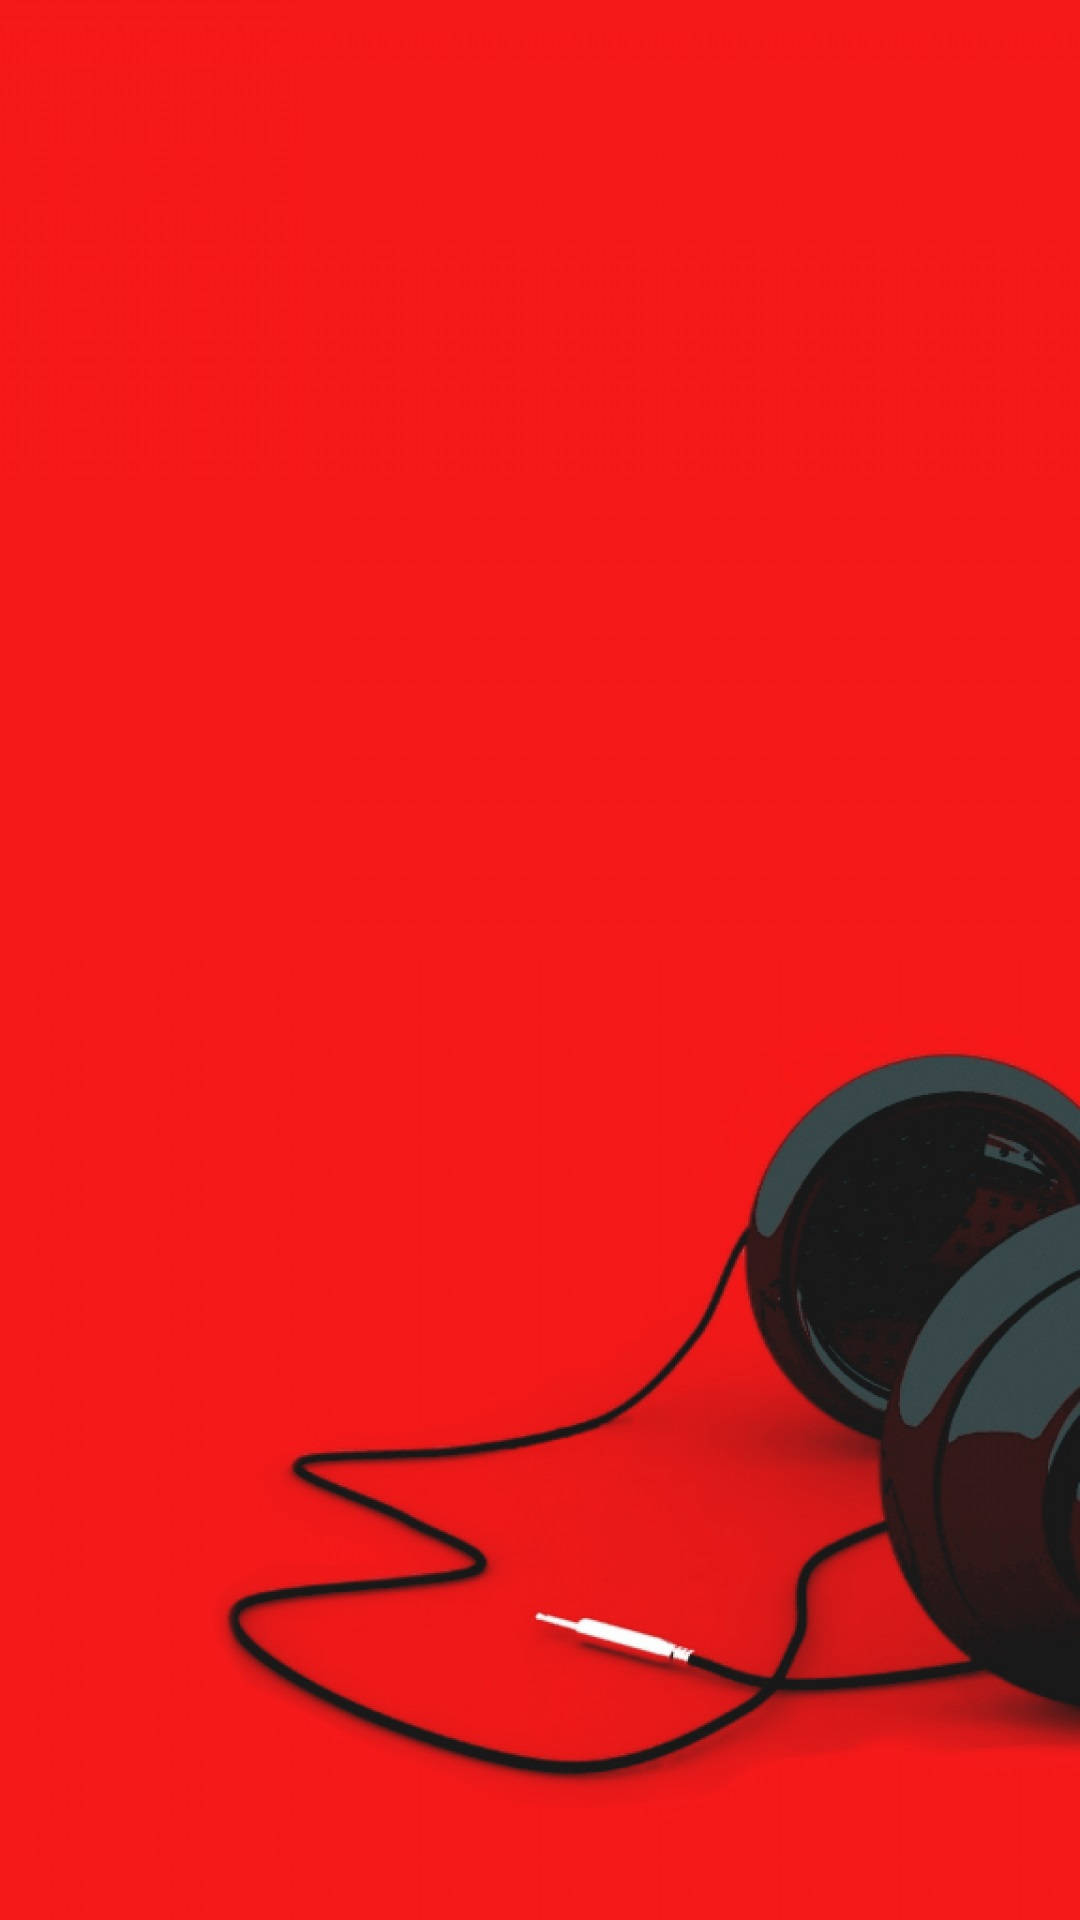 Wired Headphones Red Iphone Background